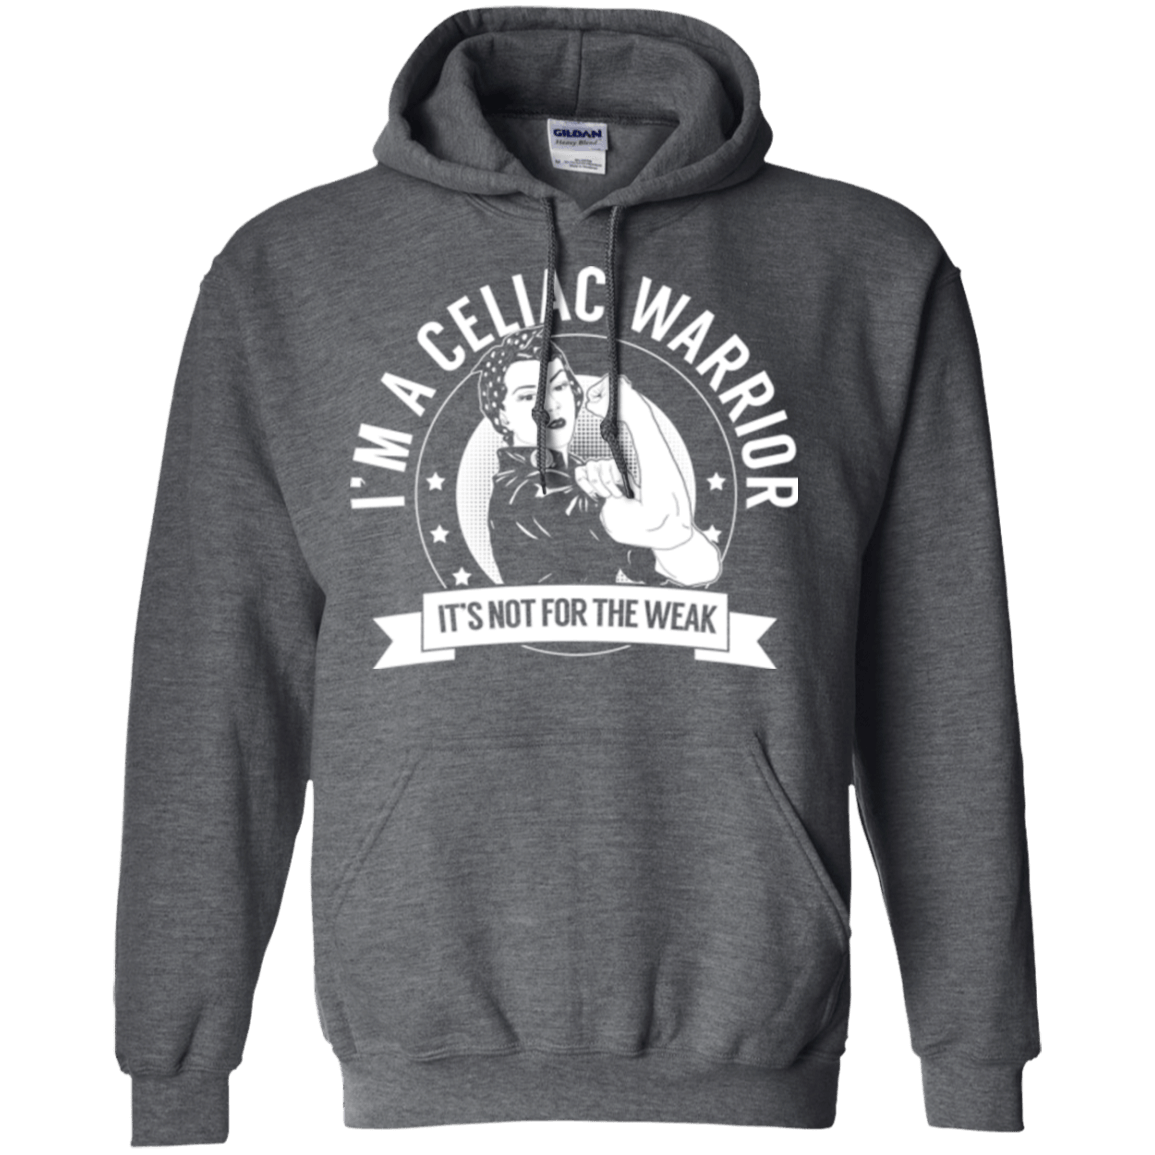 Celiac Warrior Not For The Weak Pullover Hoodie 8 oz. - The Unchargeables